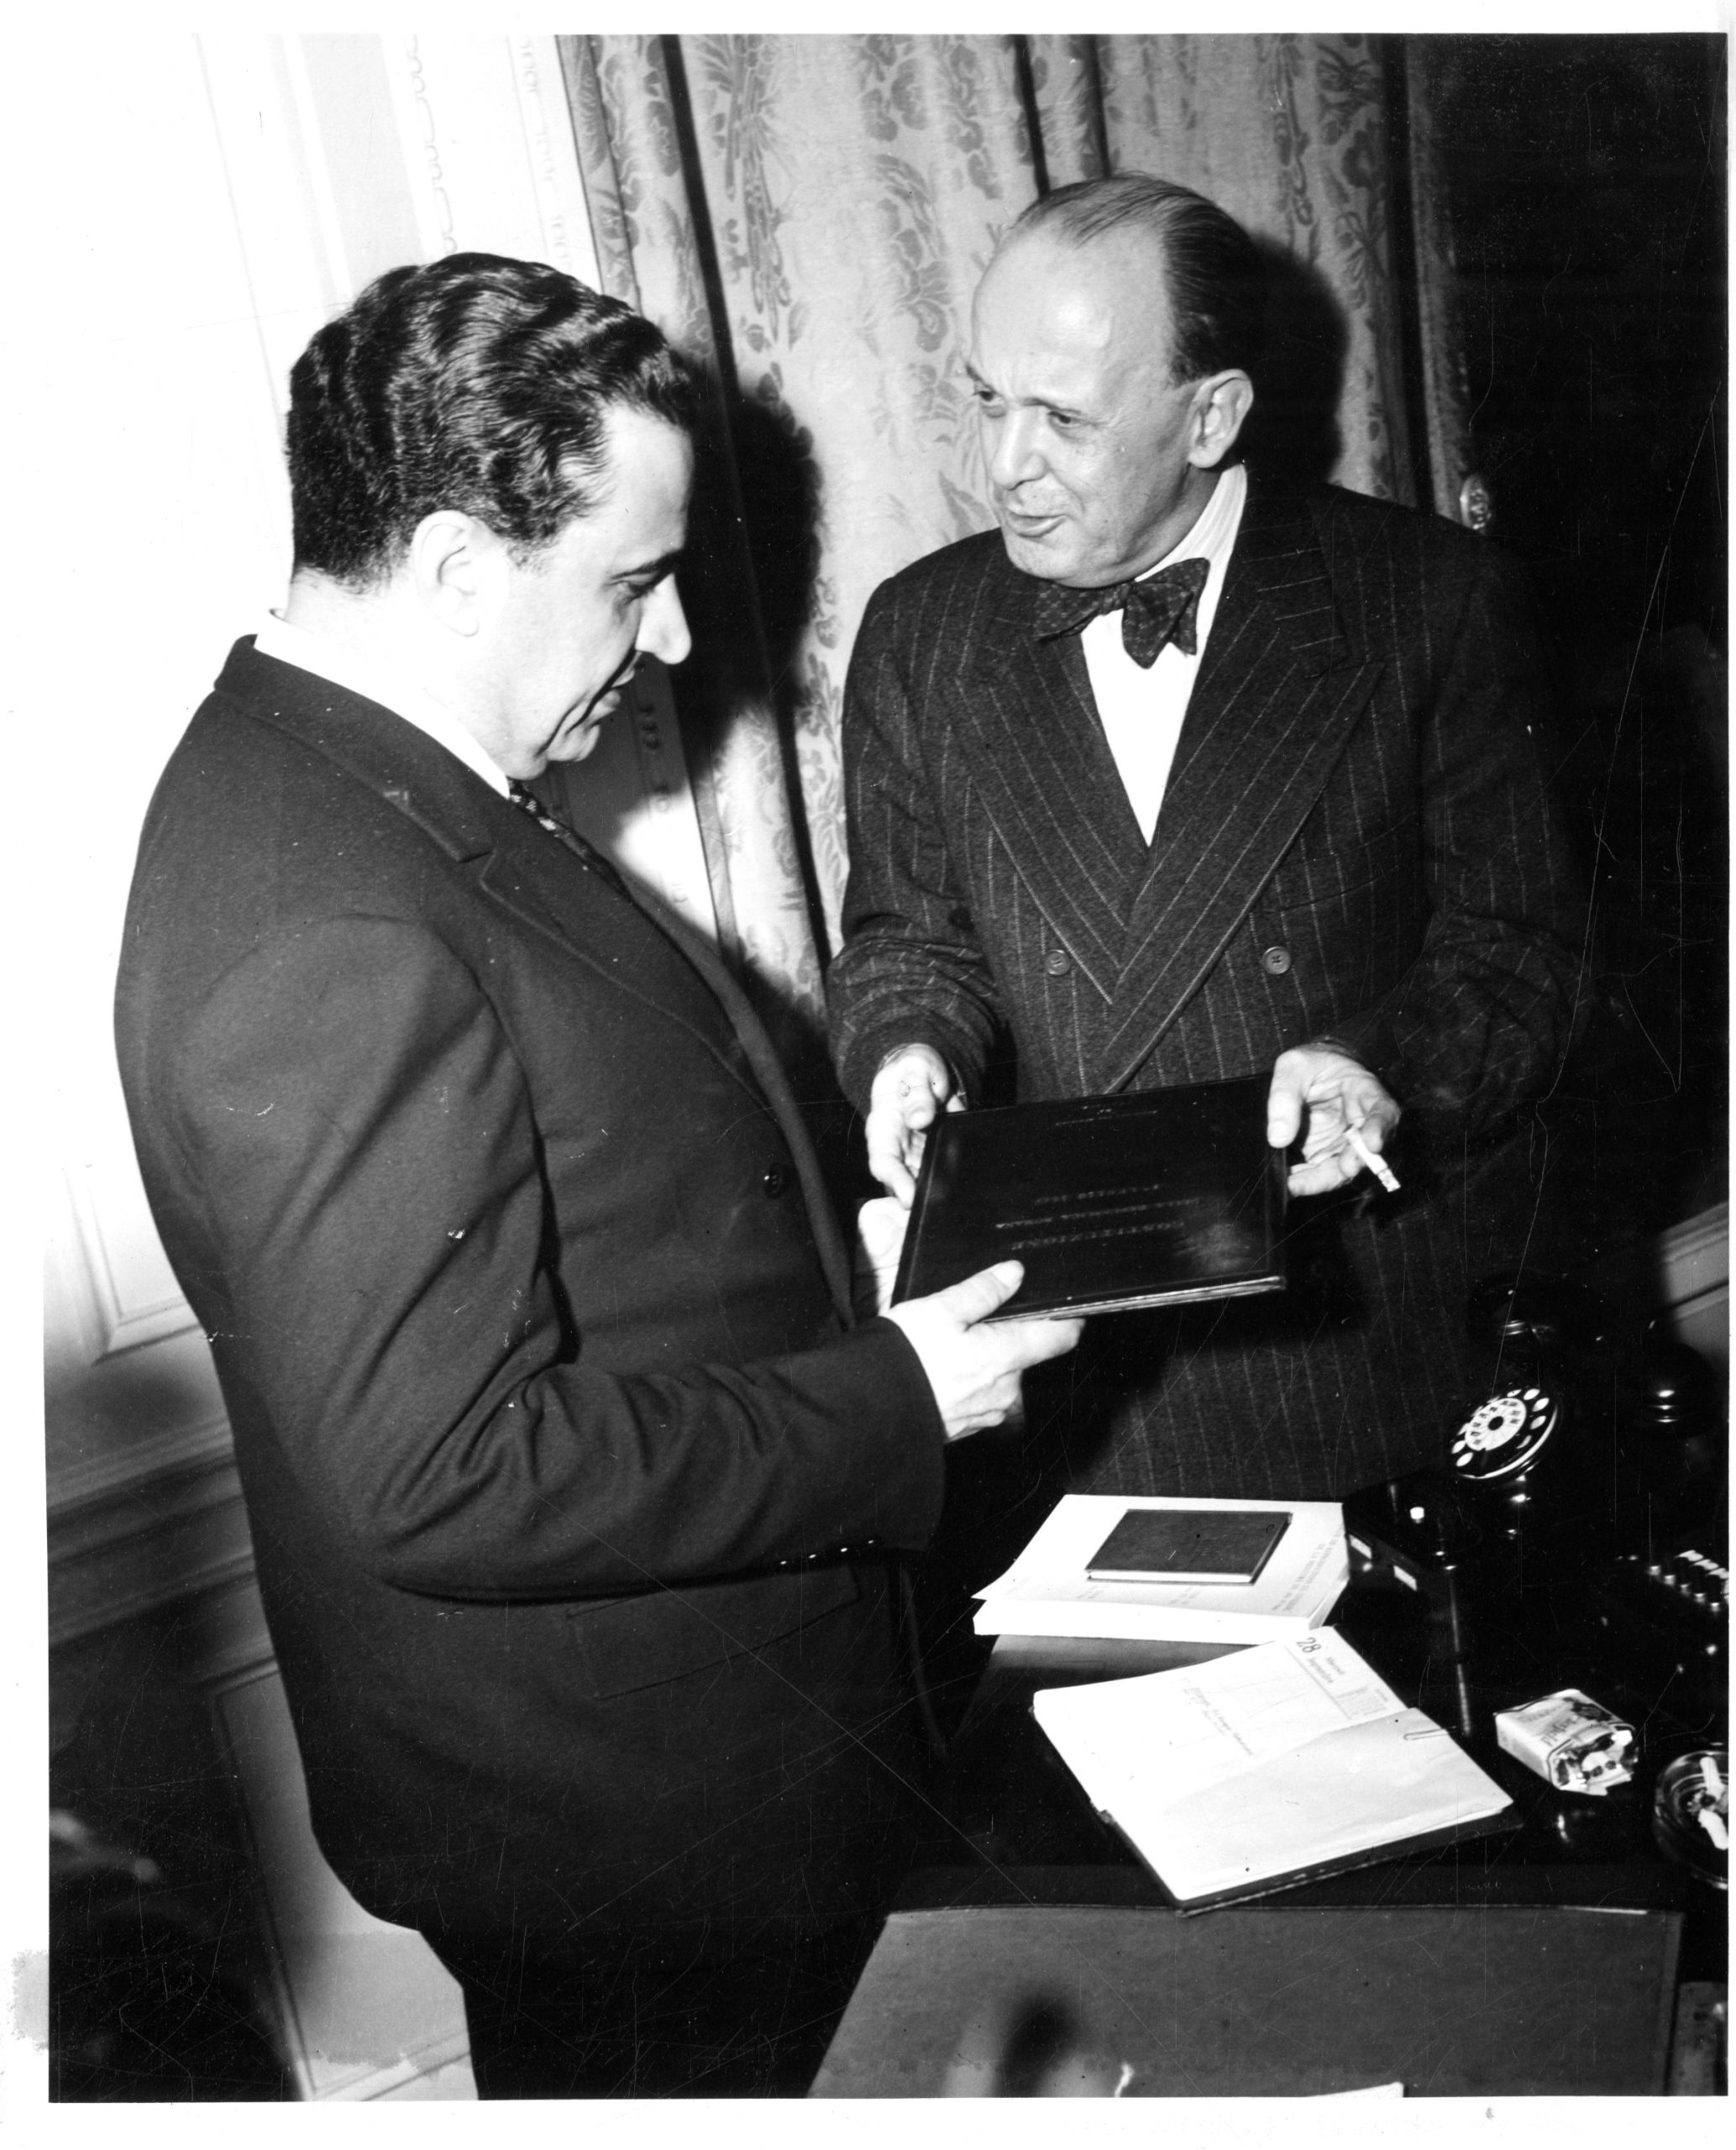 UNESCO Secretary-General Dr. Jaime Torres Bodet and the Honorable Pietro Quaroni, Italian Ambassador to France. UNESCO Fourth General Conference, Paris, September 19th/October 5th, 1949. Photo by the United States Information Service. Howard Hanson Collection.